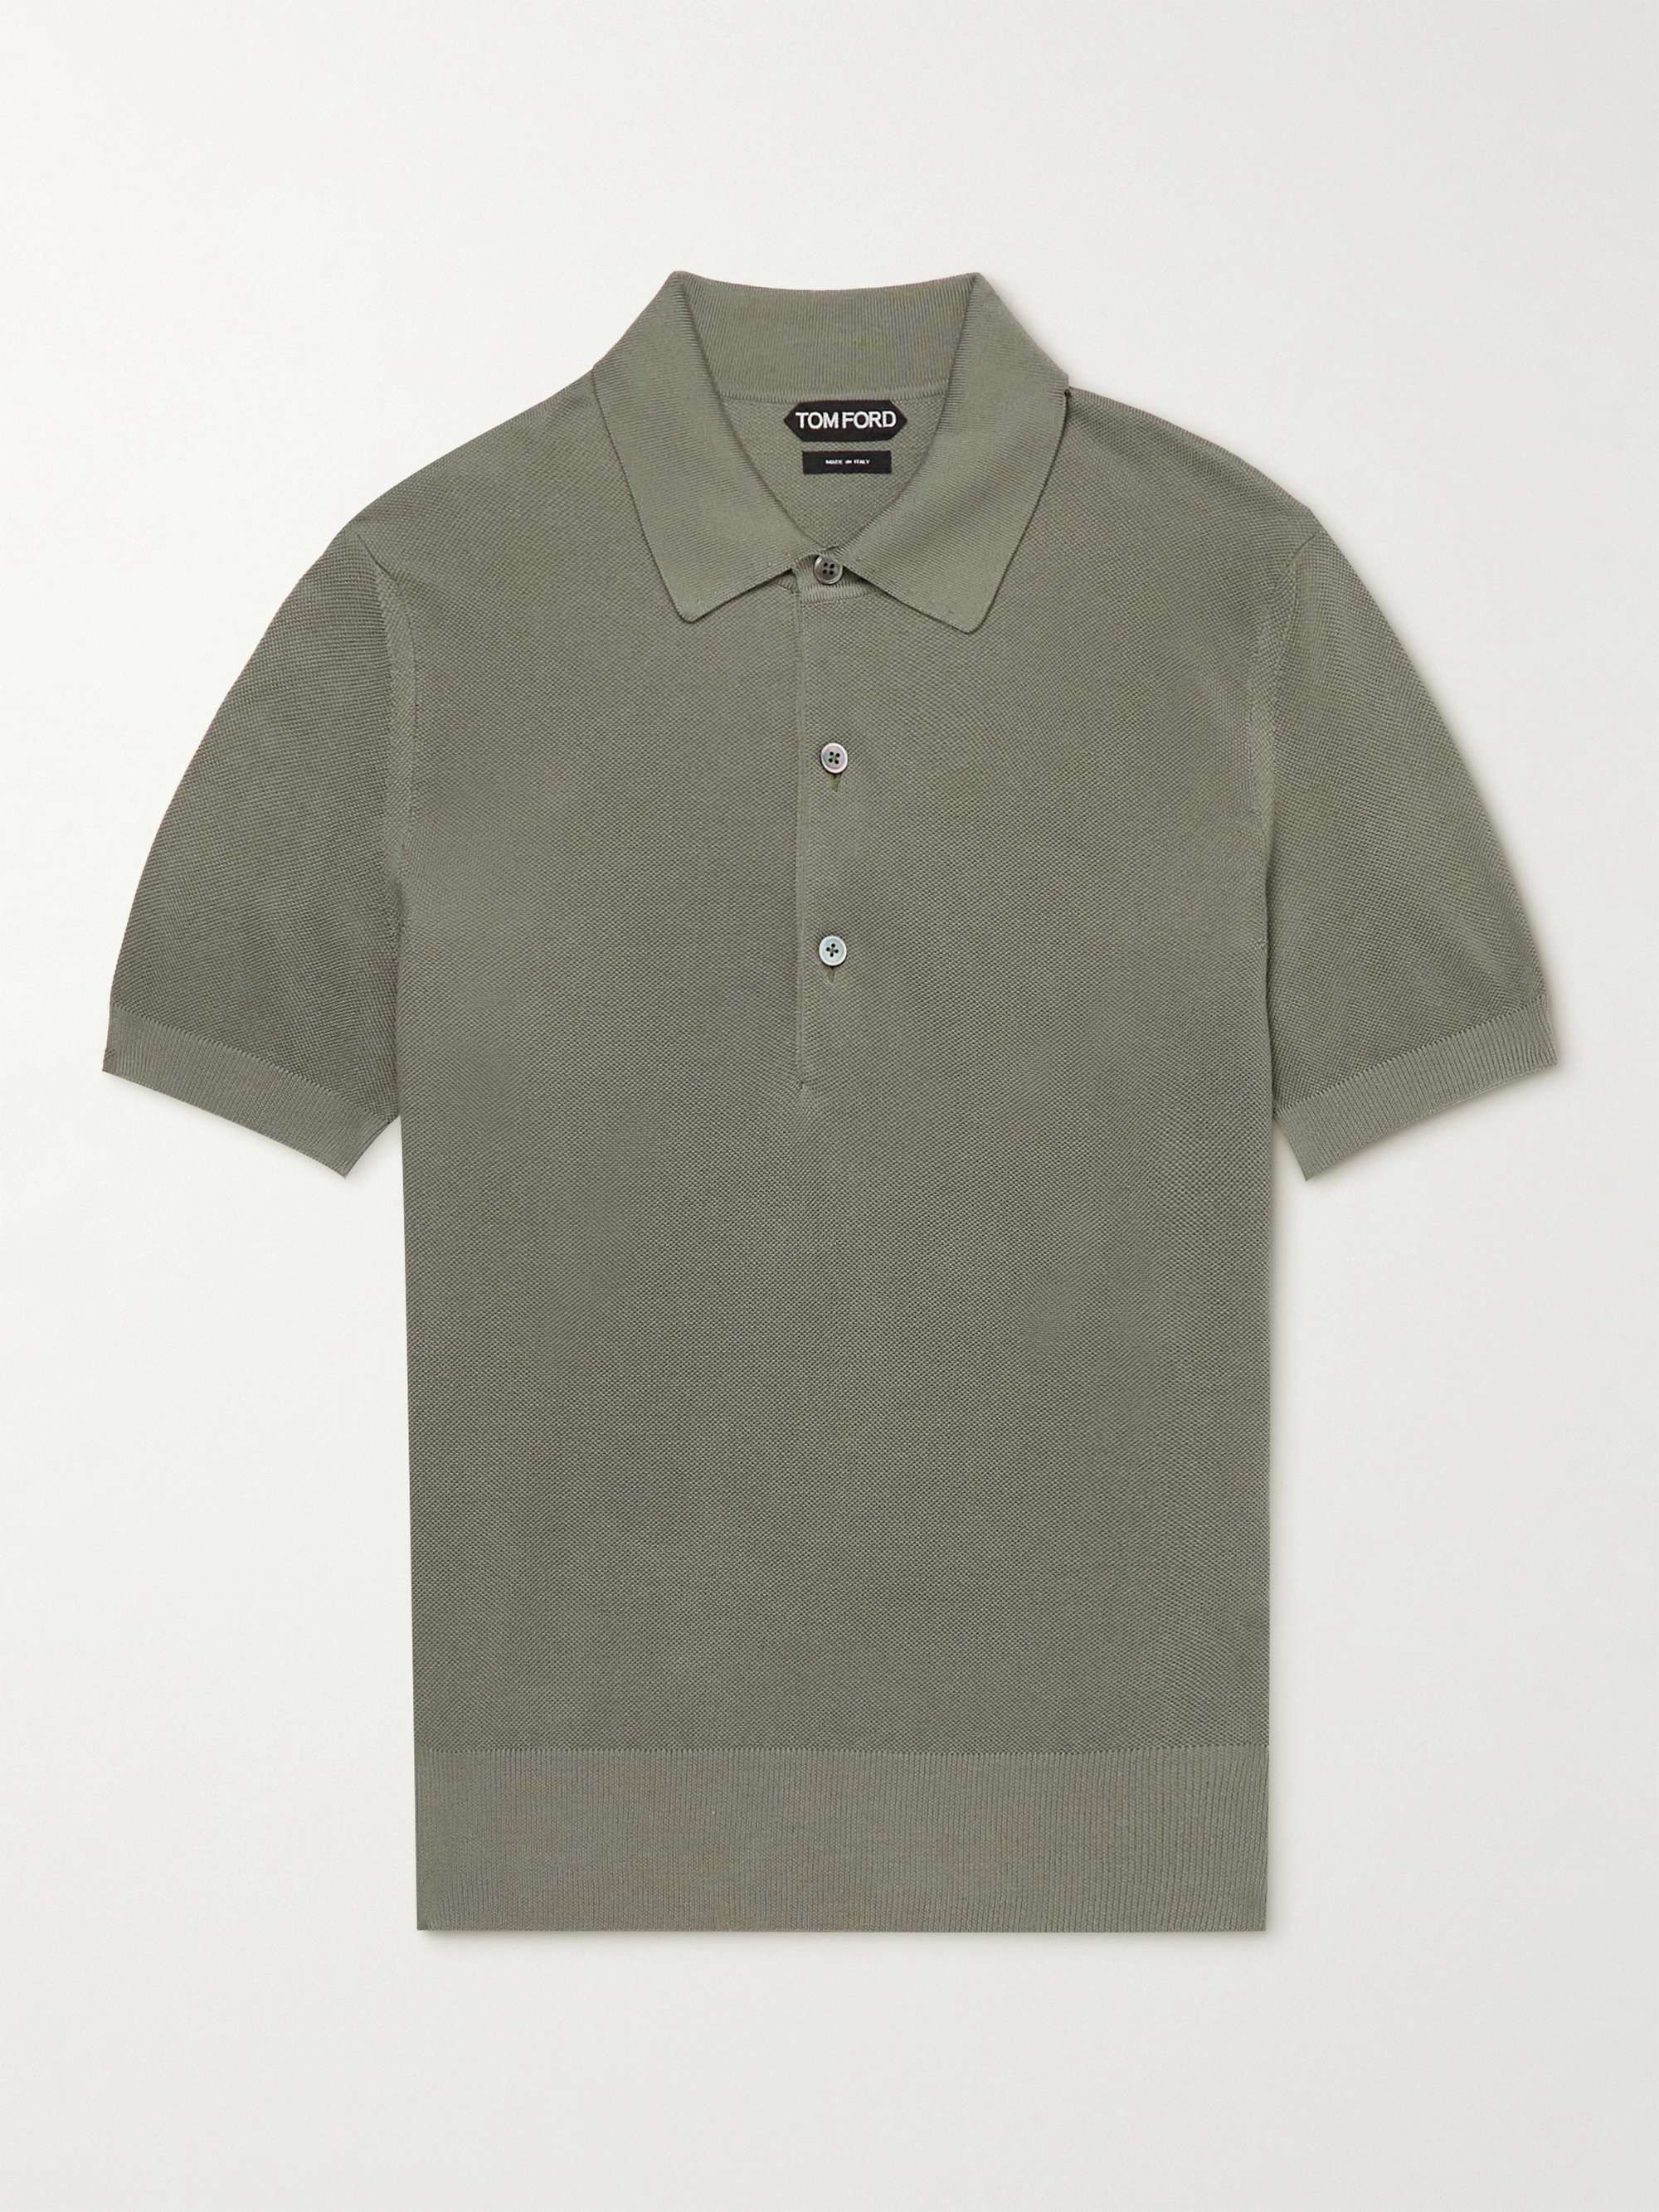 TOM FORD Honeycomb-Knit Silk and Cotton-Blend Polo Shirt